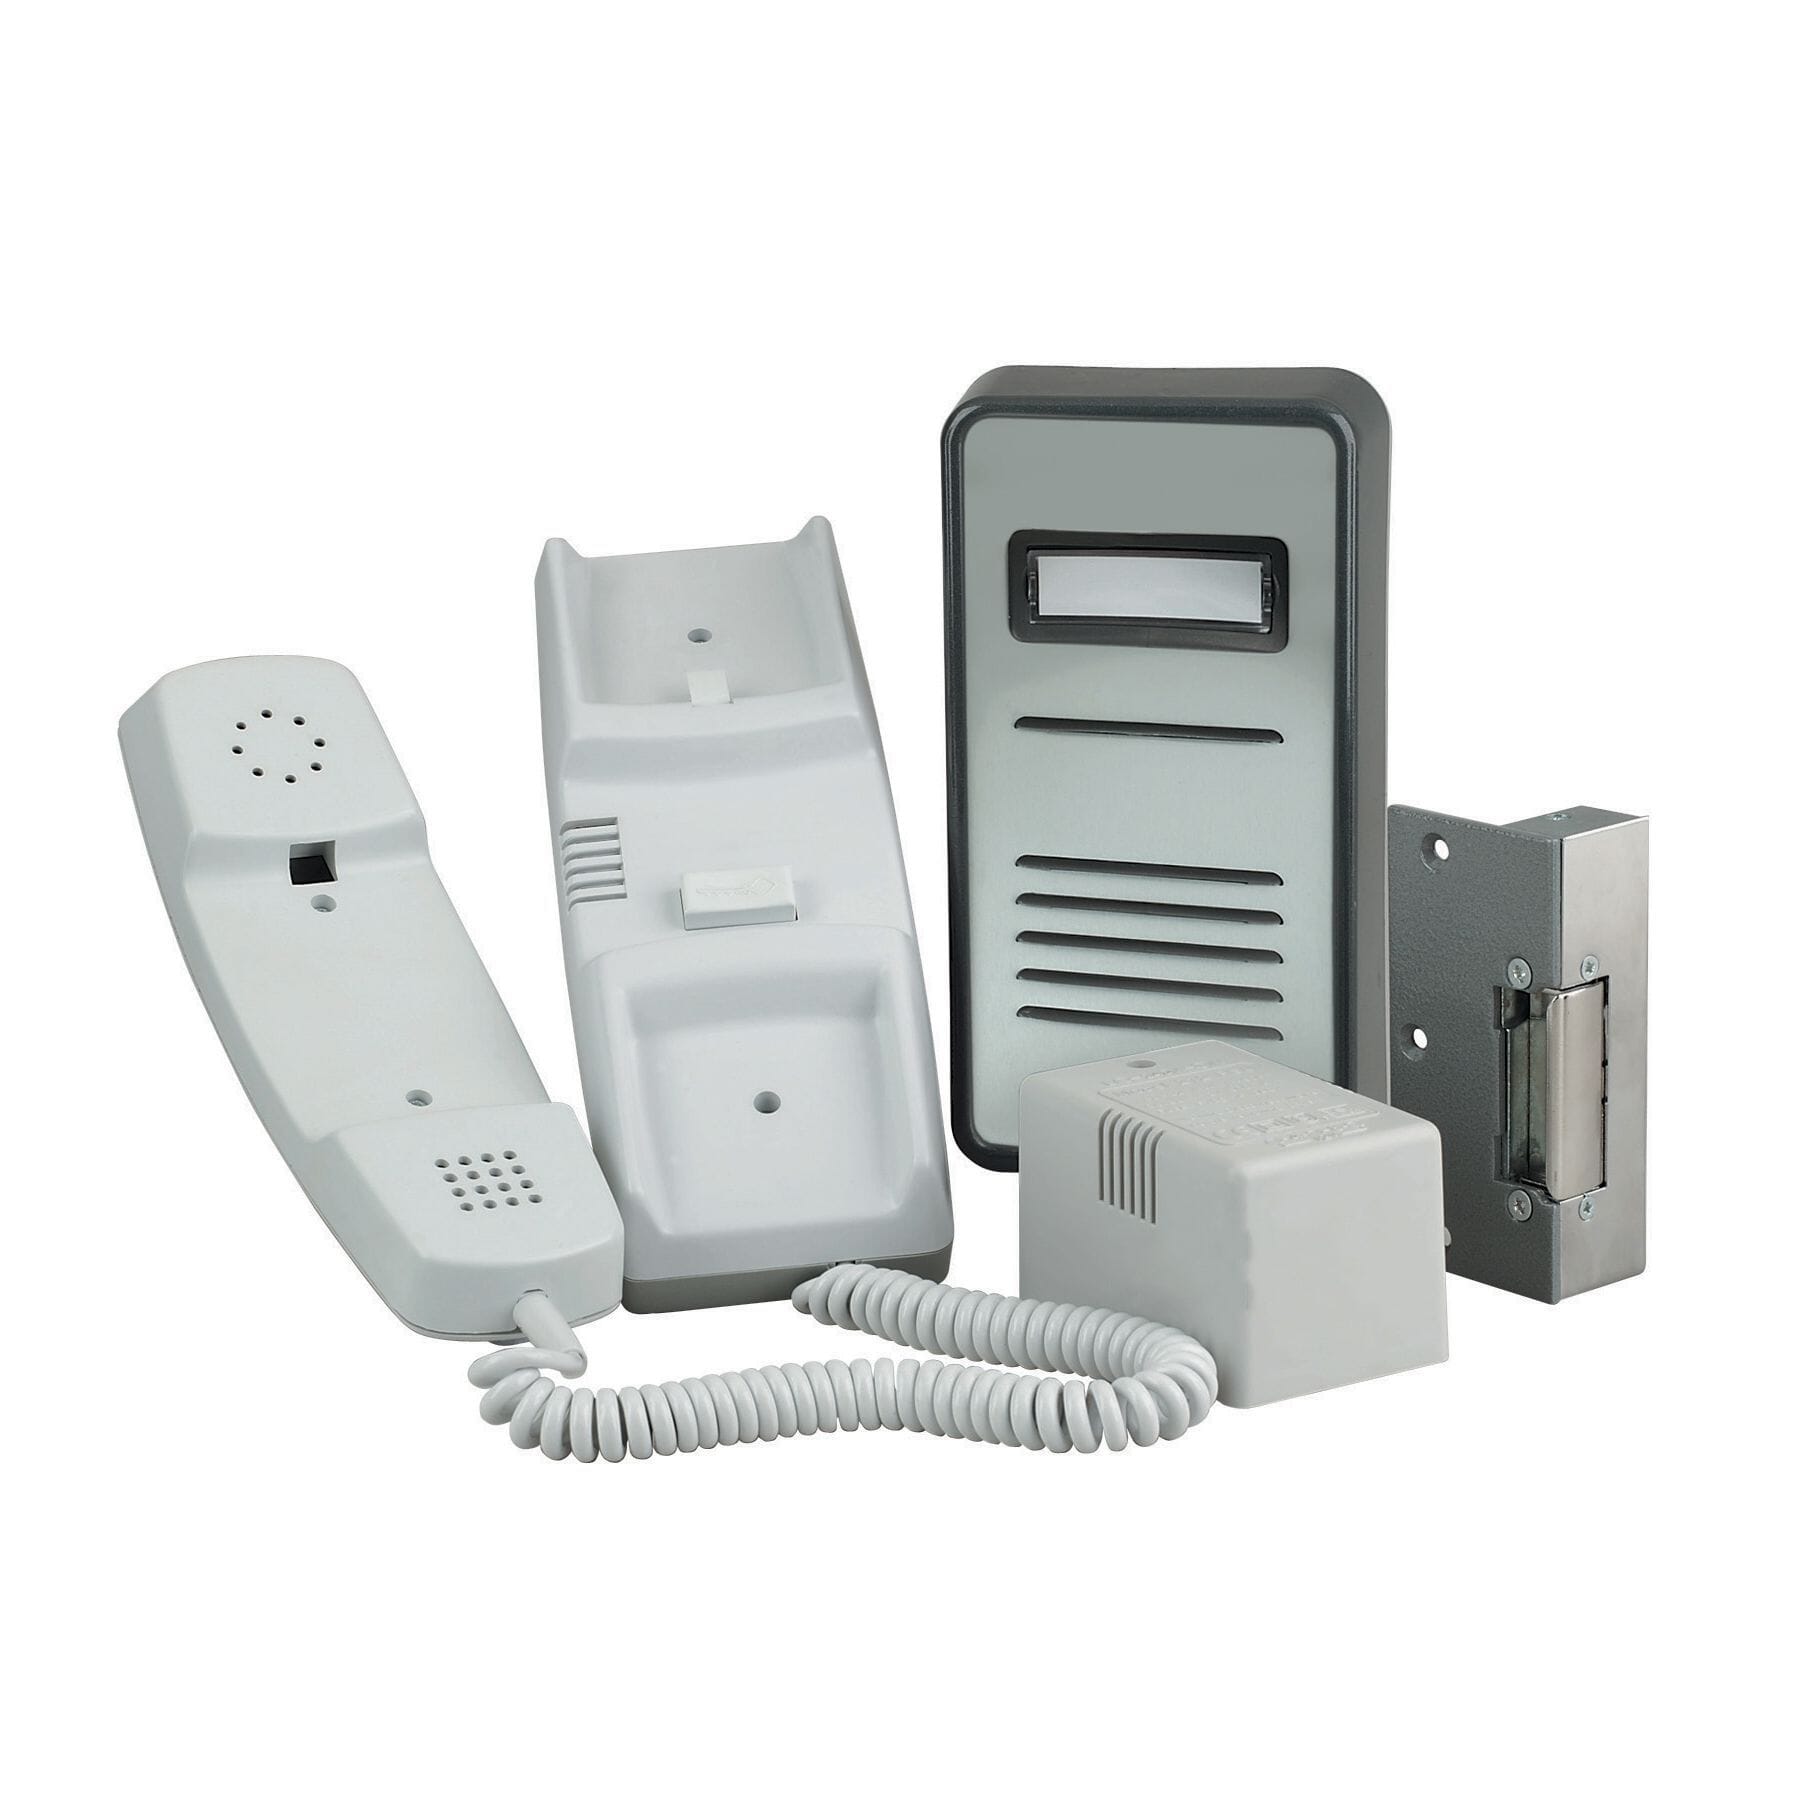 View Bell Surface Mount 3 Way Door Entry System information